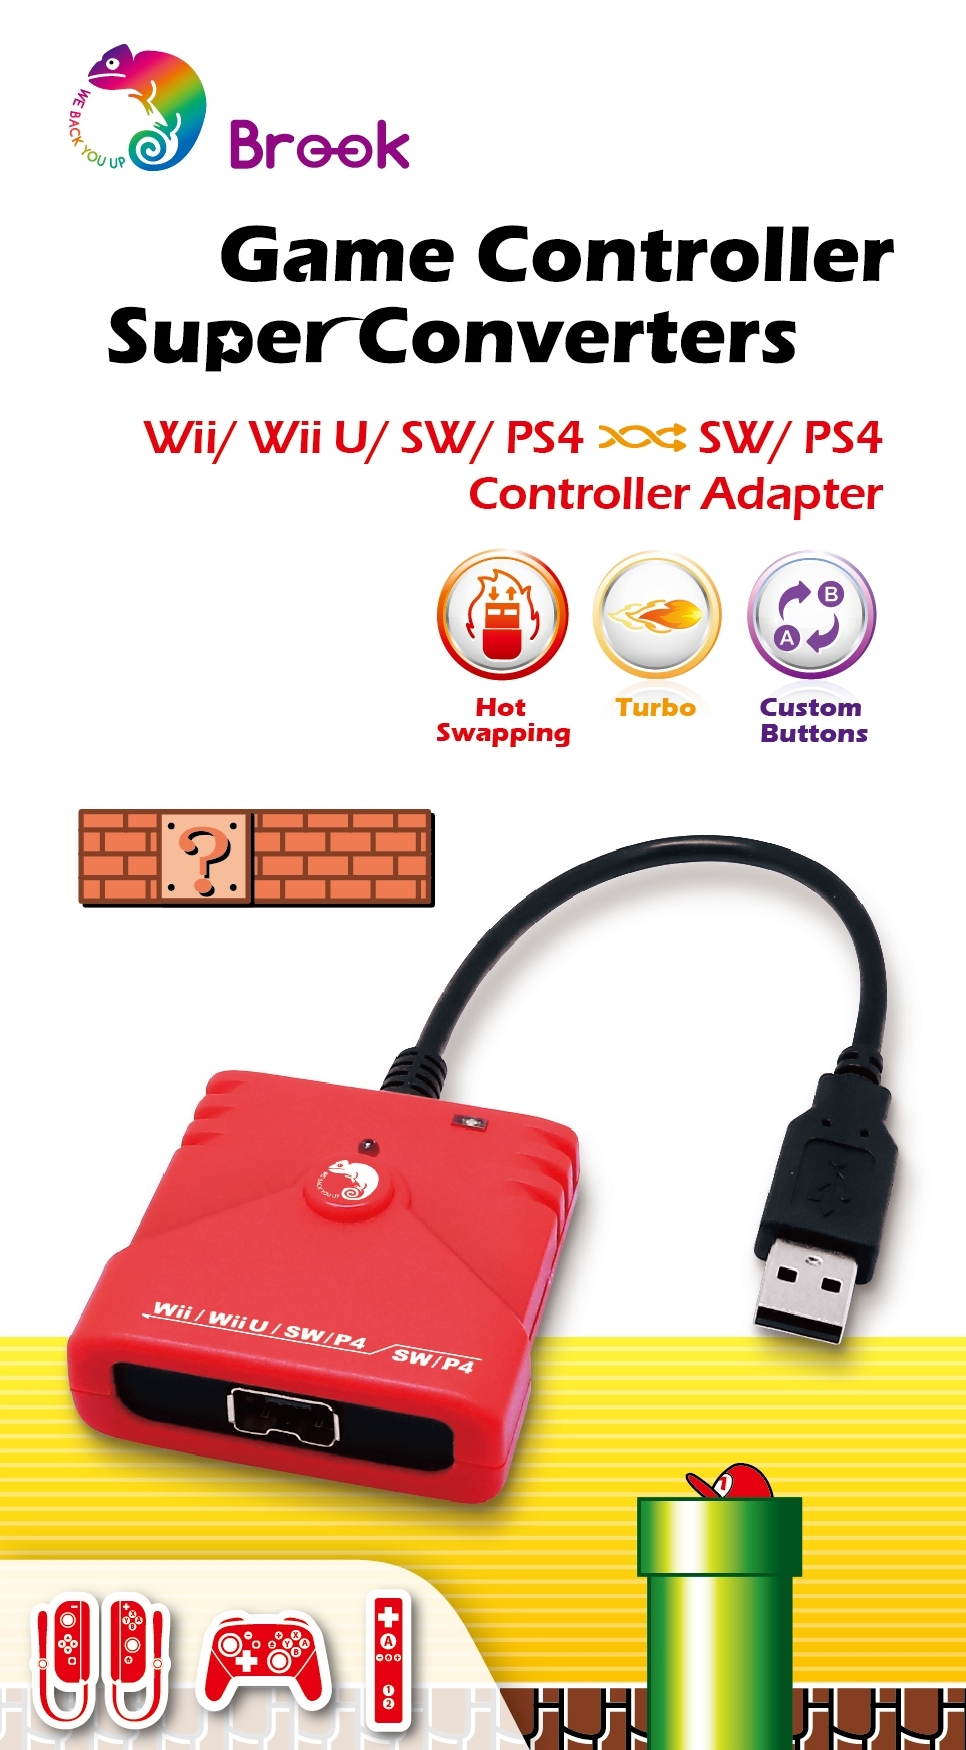 Wii Wii U Sw Ps4 To Sw Ps4 Super Converter Brook Gaming